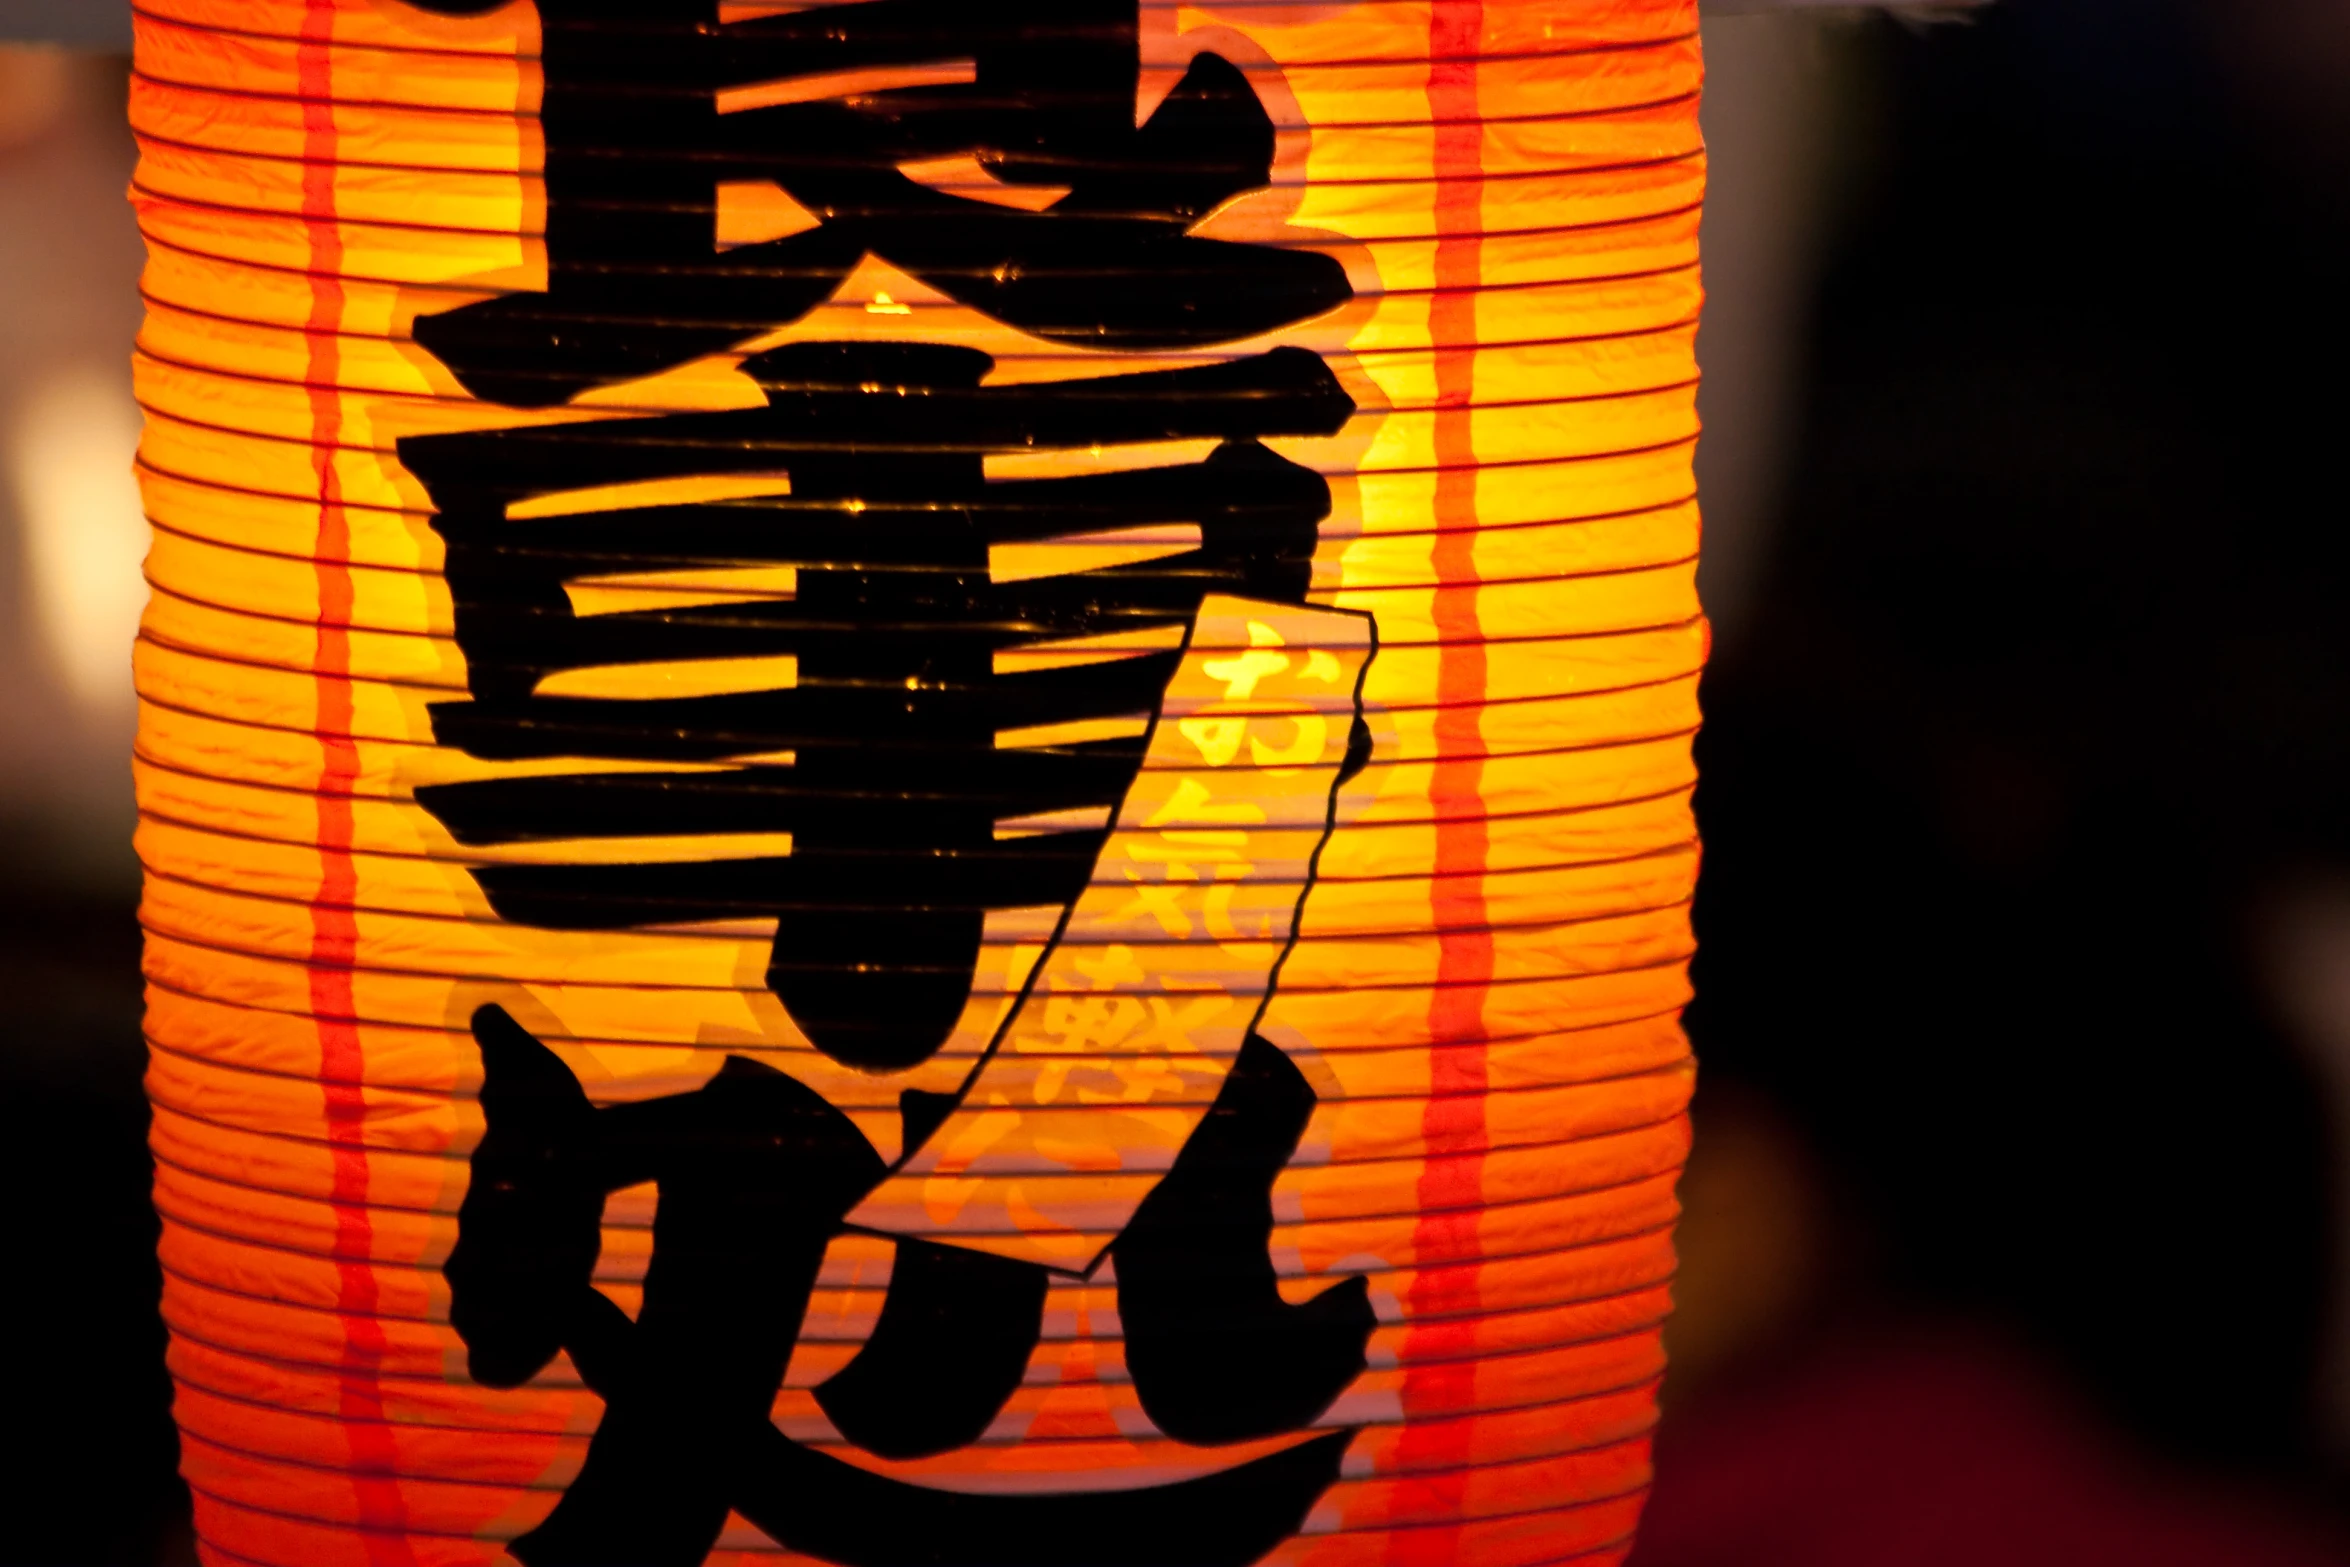 a lit lantern has writing in chinese characters on it